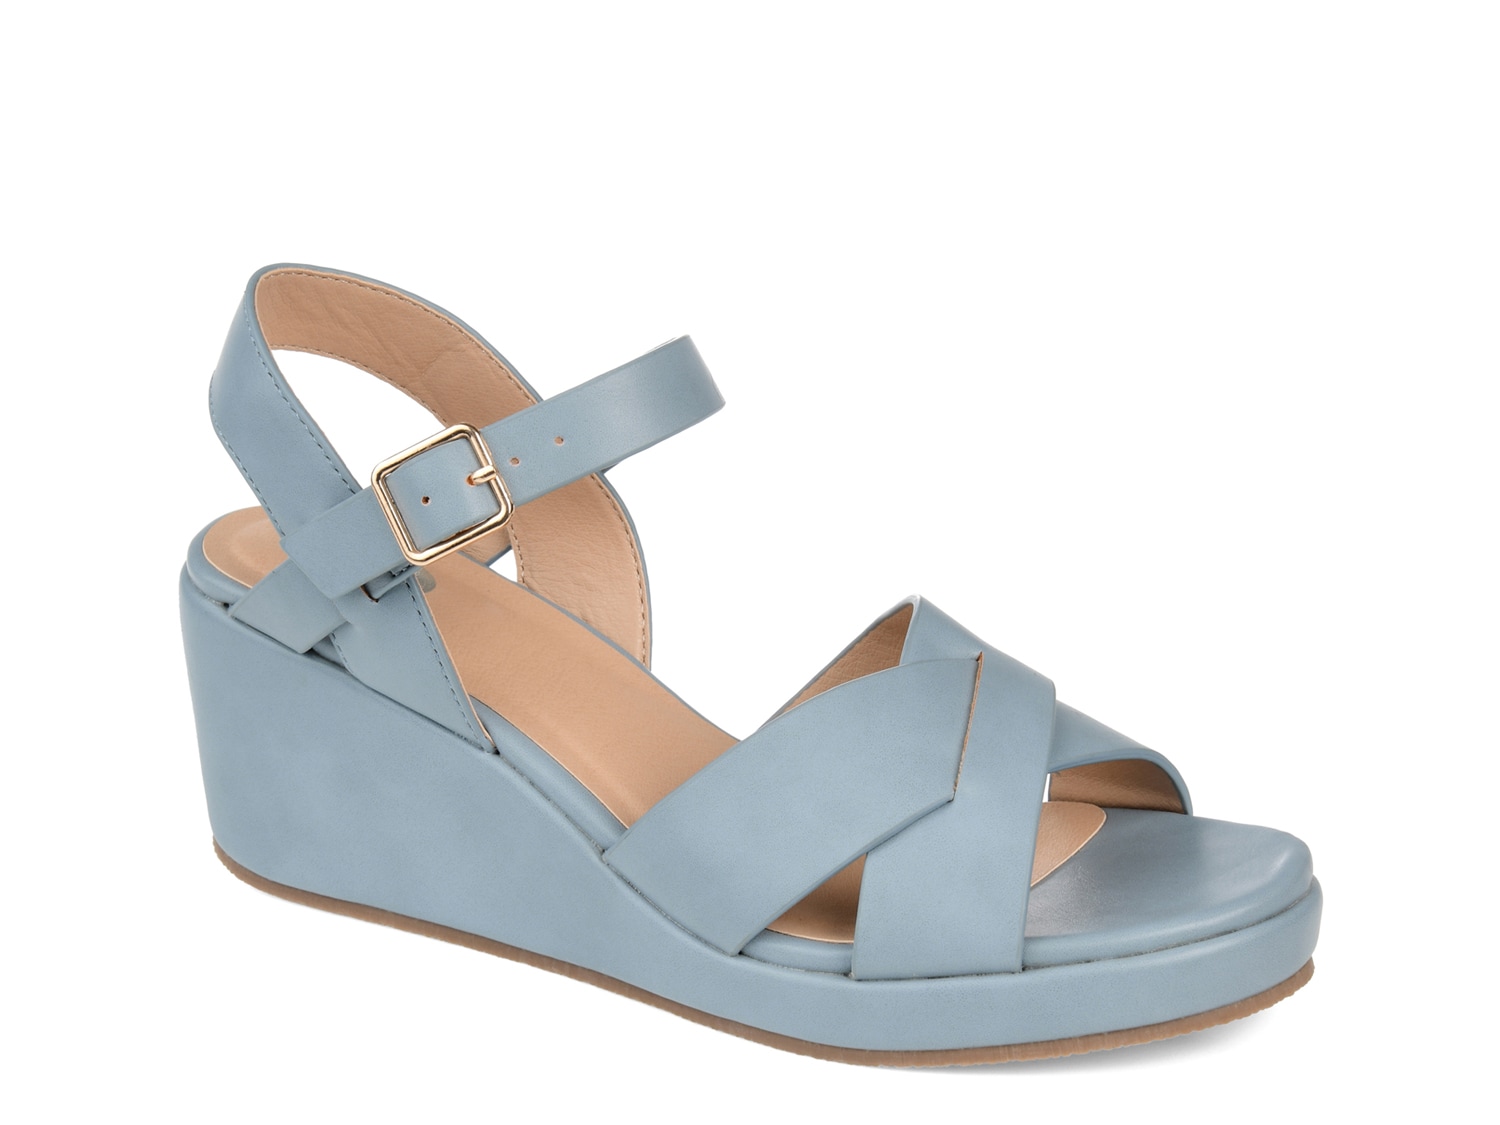 Journee Collection Kirstie Wedge Sandal - Free Shipping | DSW